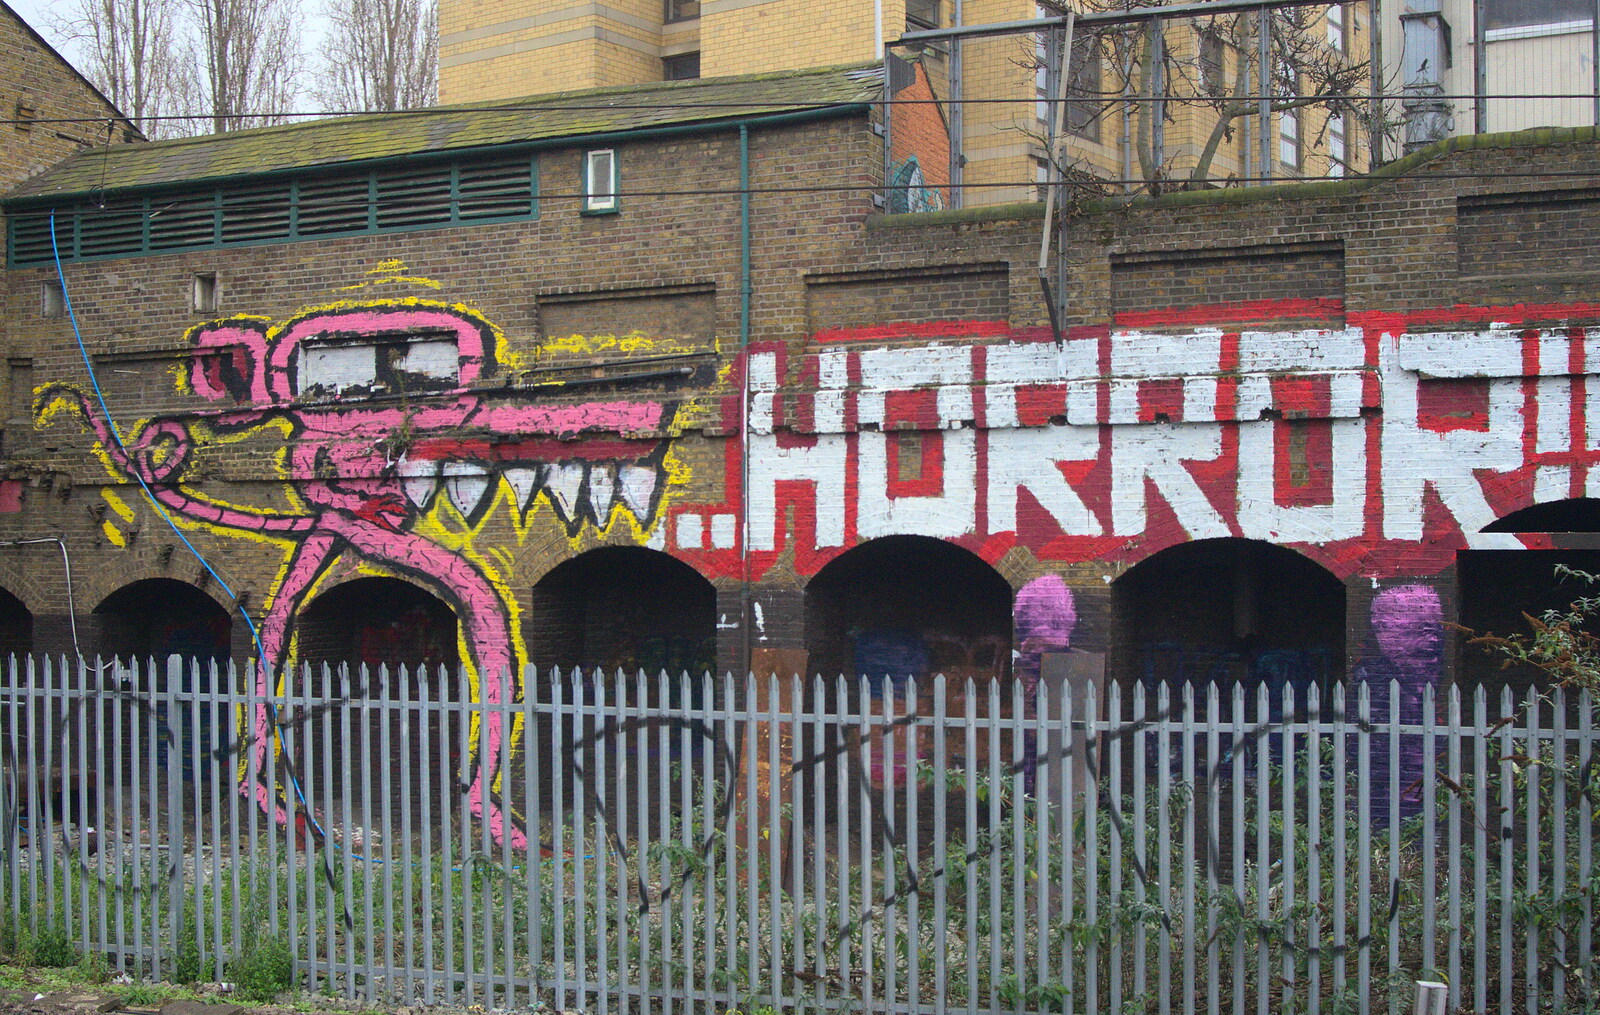 Nosher's favourite toothy pink monster graffiti from The Bump, TouchType at Nandos, and Isobel does London - 3rd February 2012